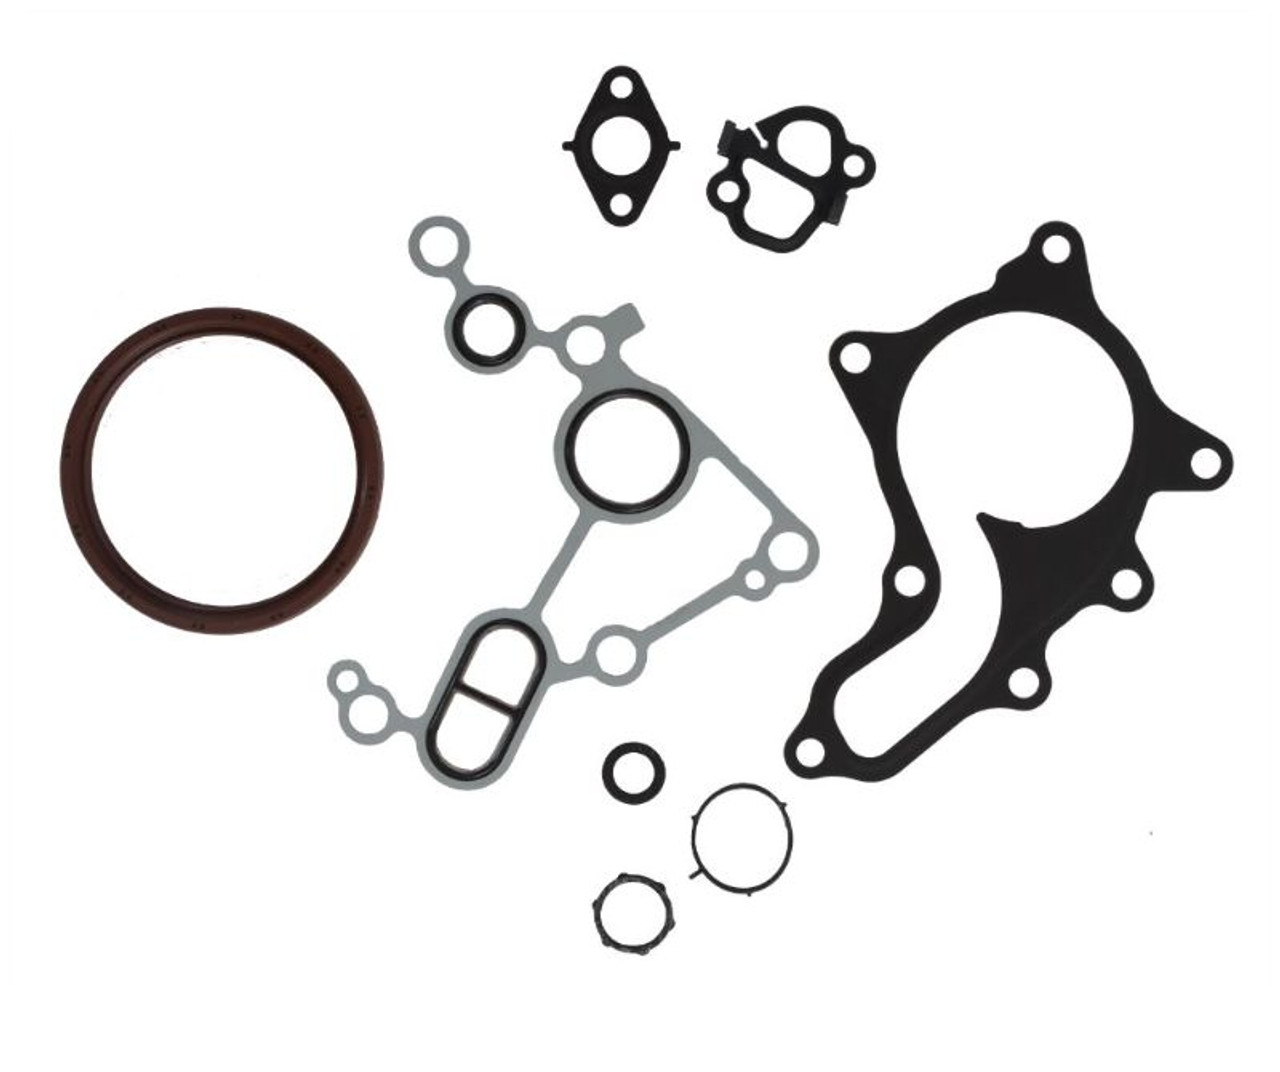 2012 Toyota Camry 2.5L Engine Lower Gasket Set TO2.5CS-A -15